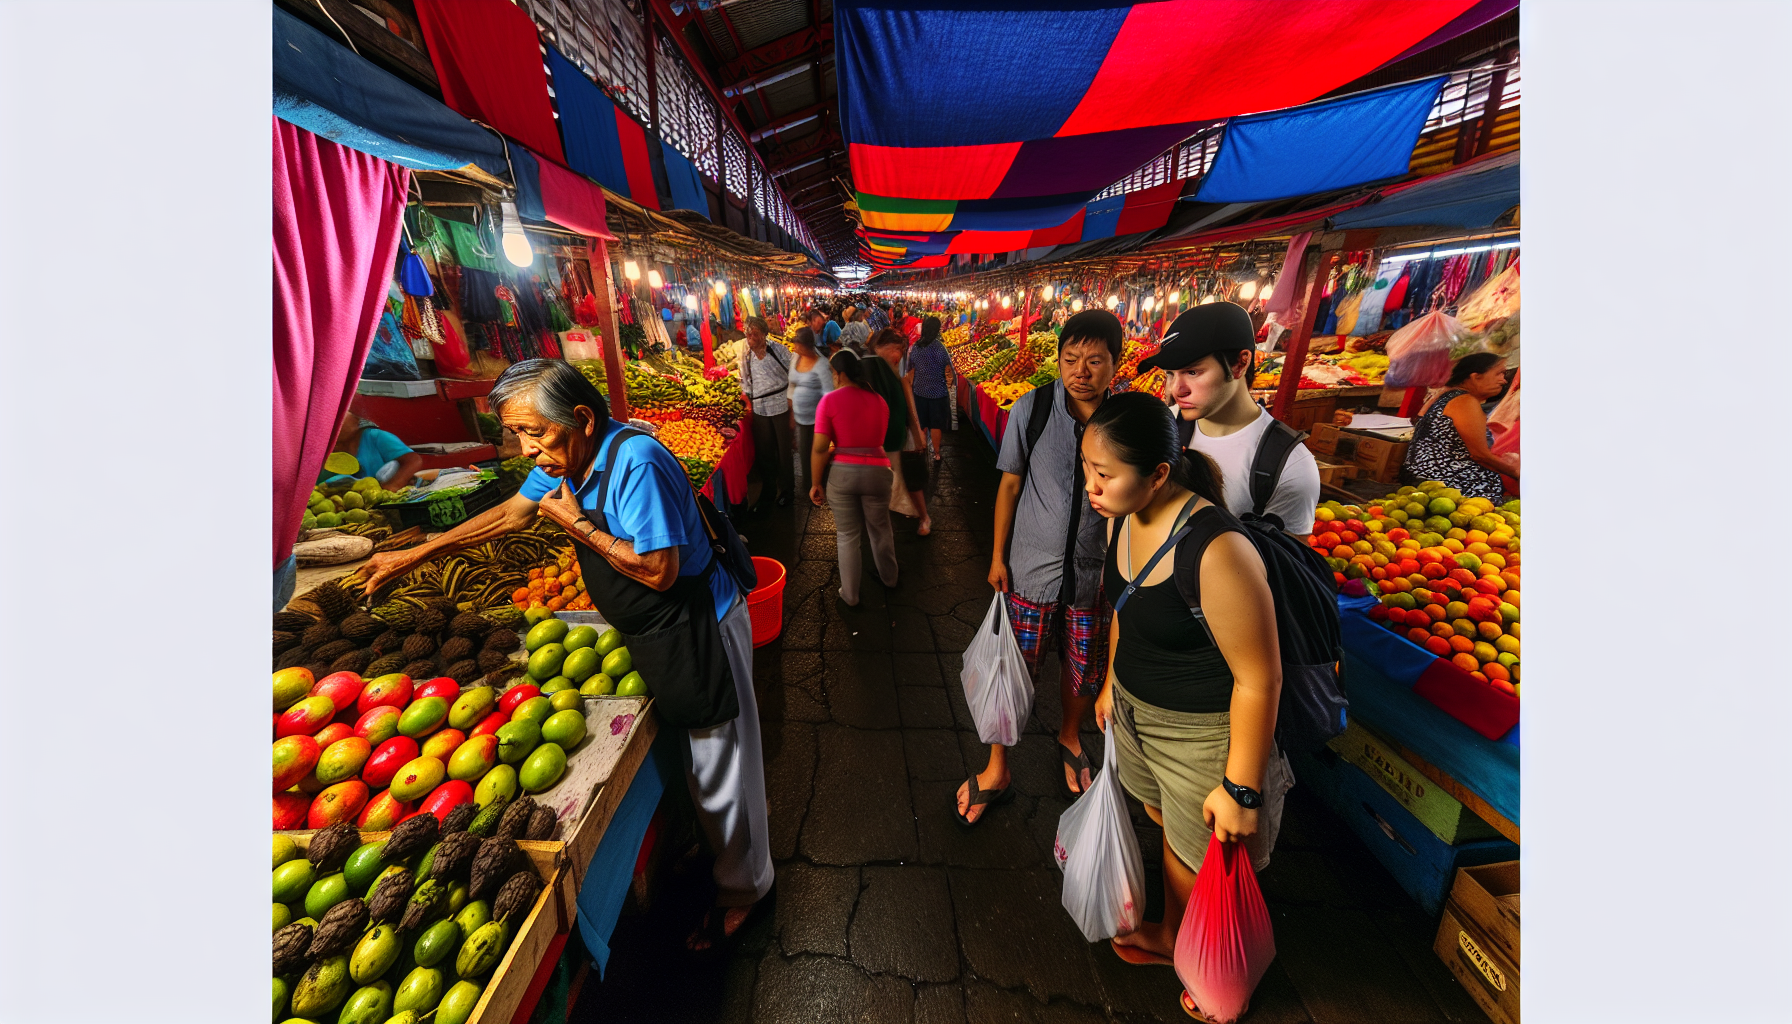 The bustling atmosphere of Mercado Central in San Jose, Costa Rica